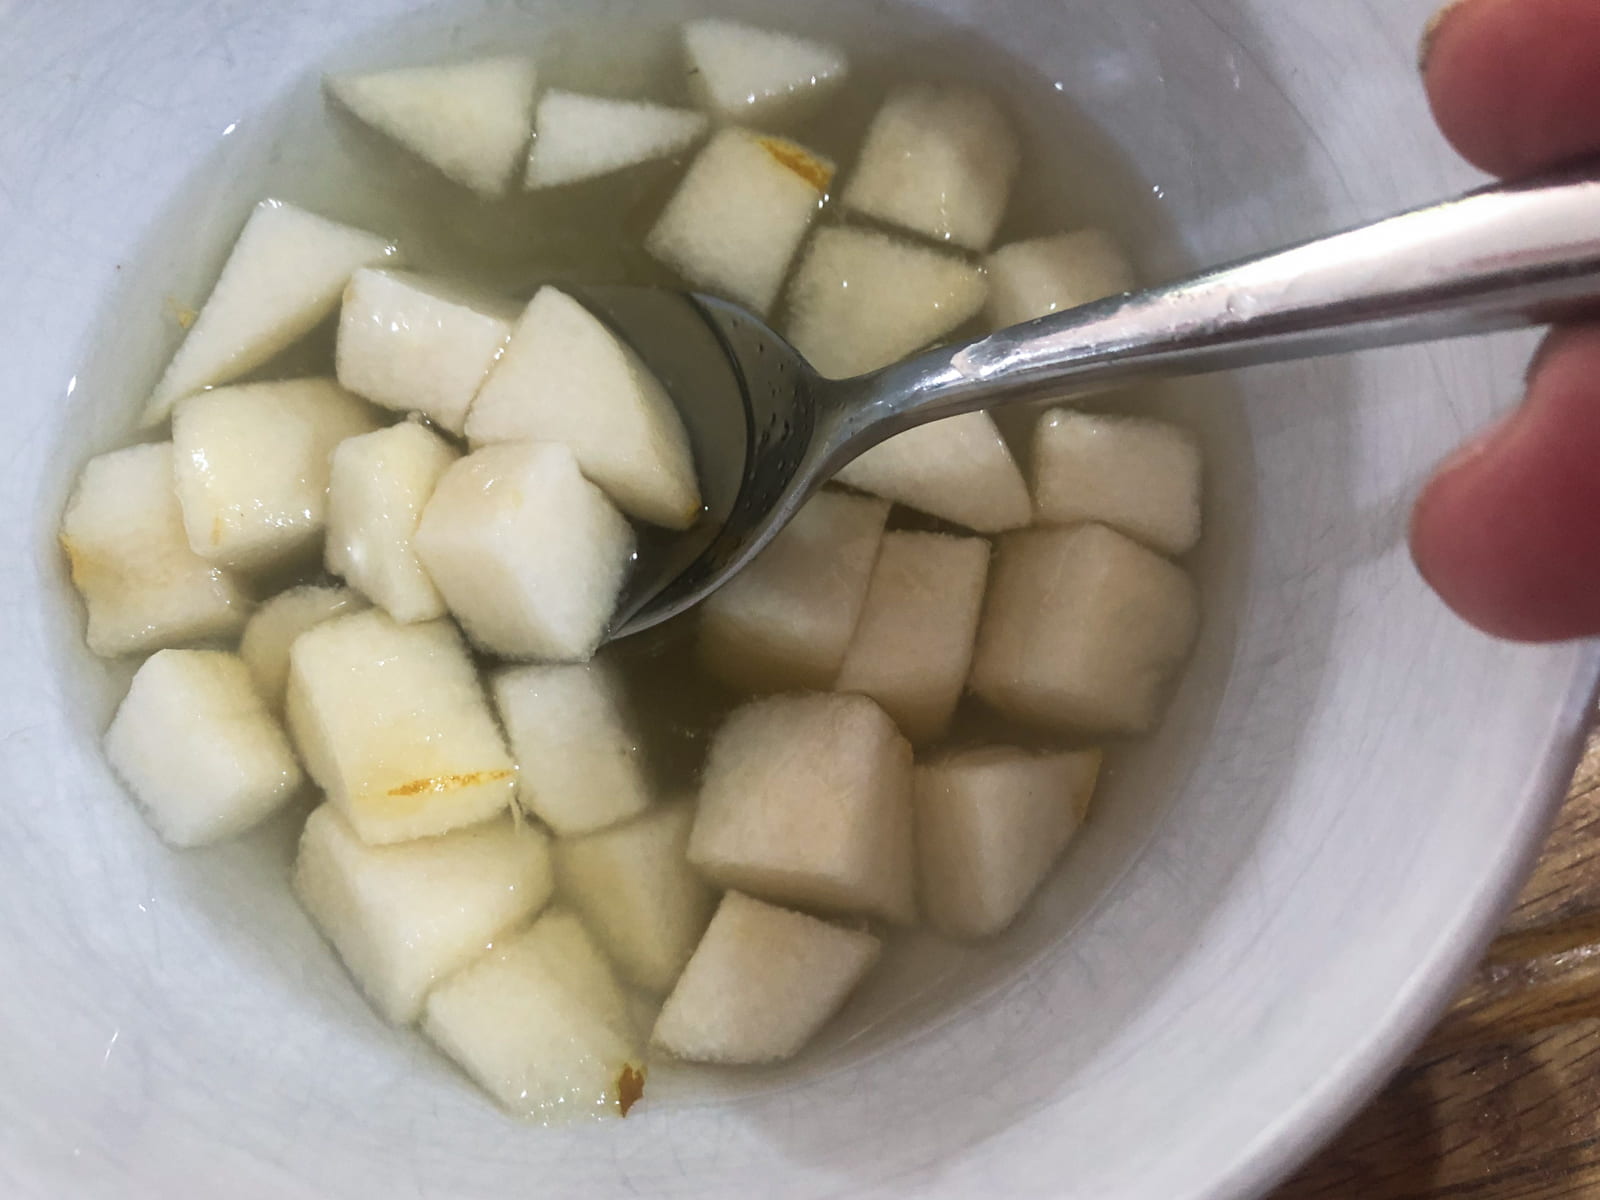 Cubed pieces of pear sitting in a small bowl of mild pickling liquor.